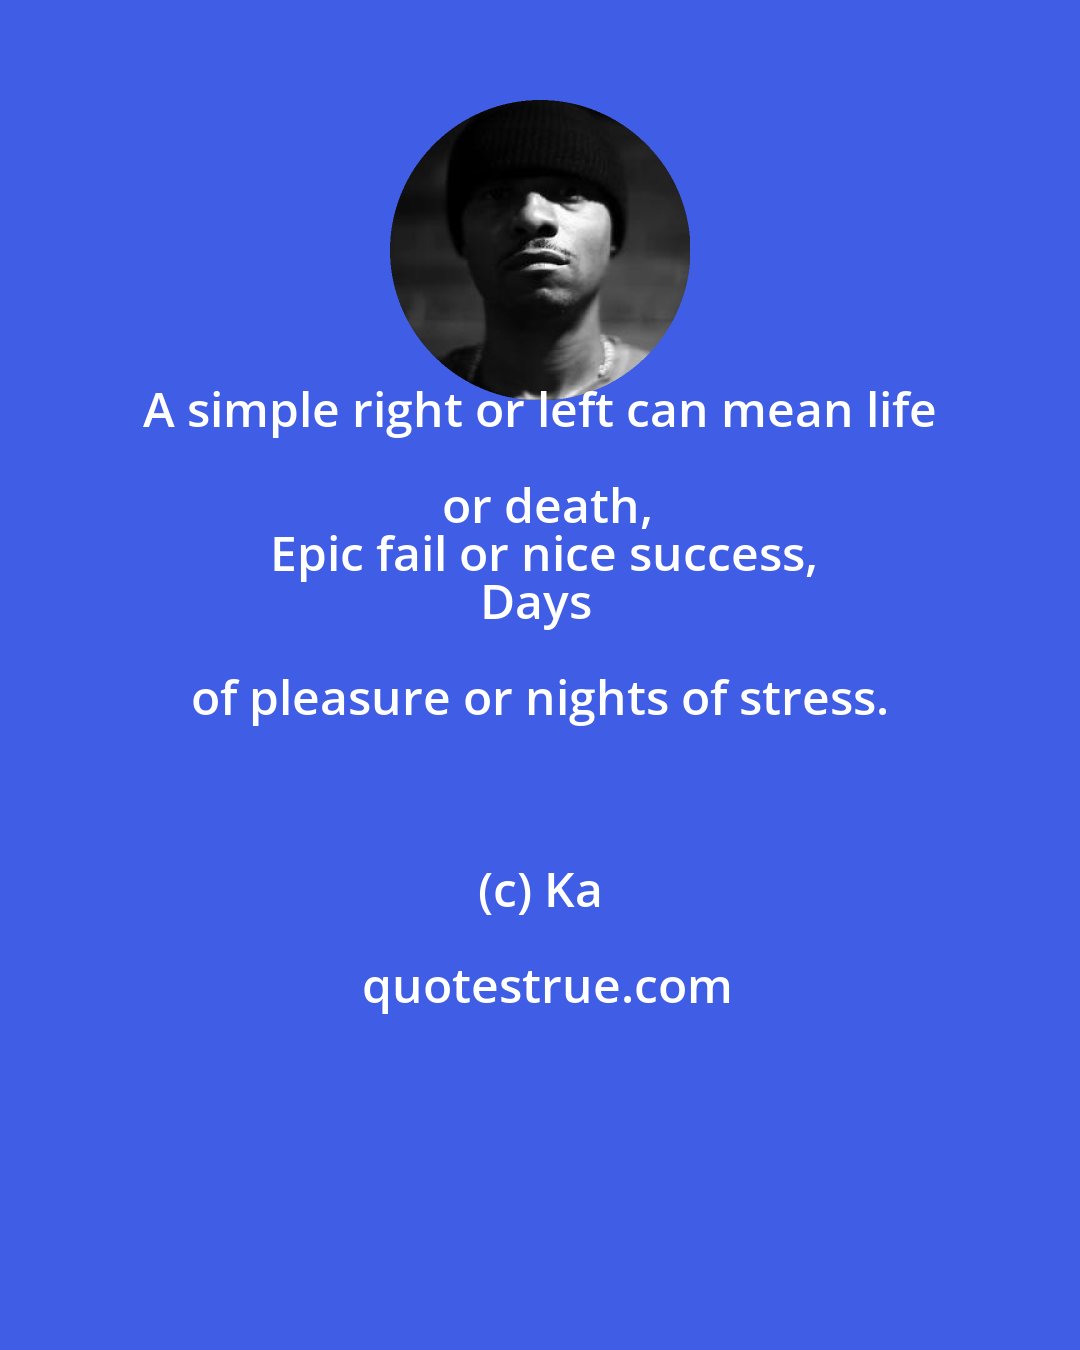 Ka: A simple right or left can mean life or death,
Epic fail or nice success,
Days of pleasure or nights of stress.